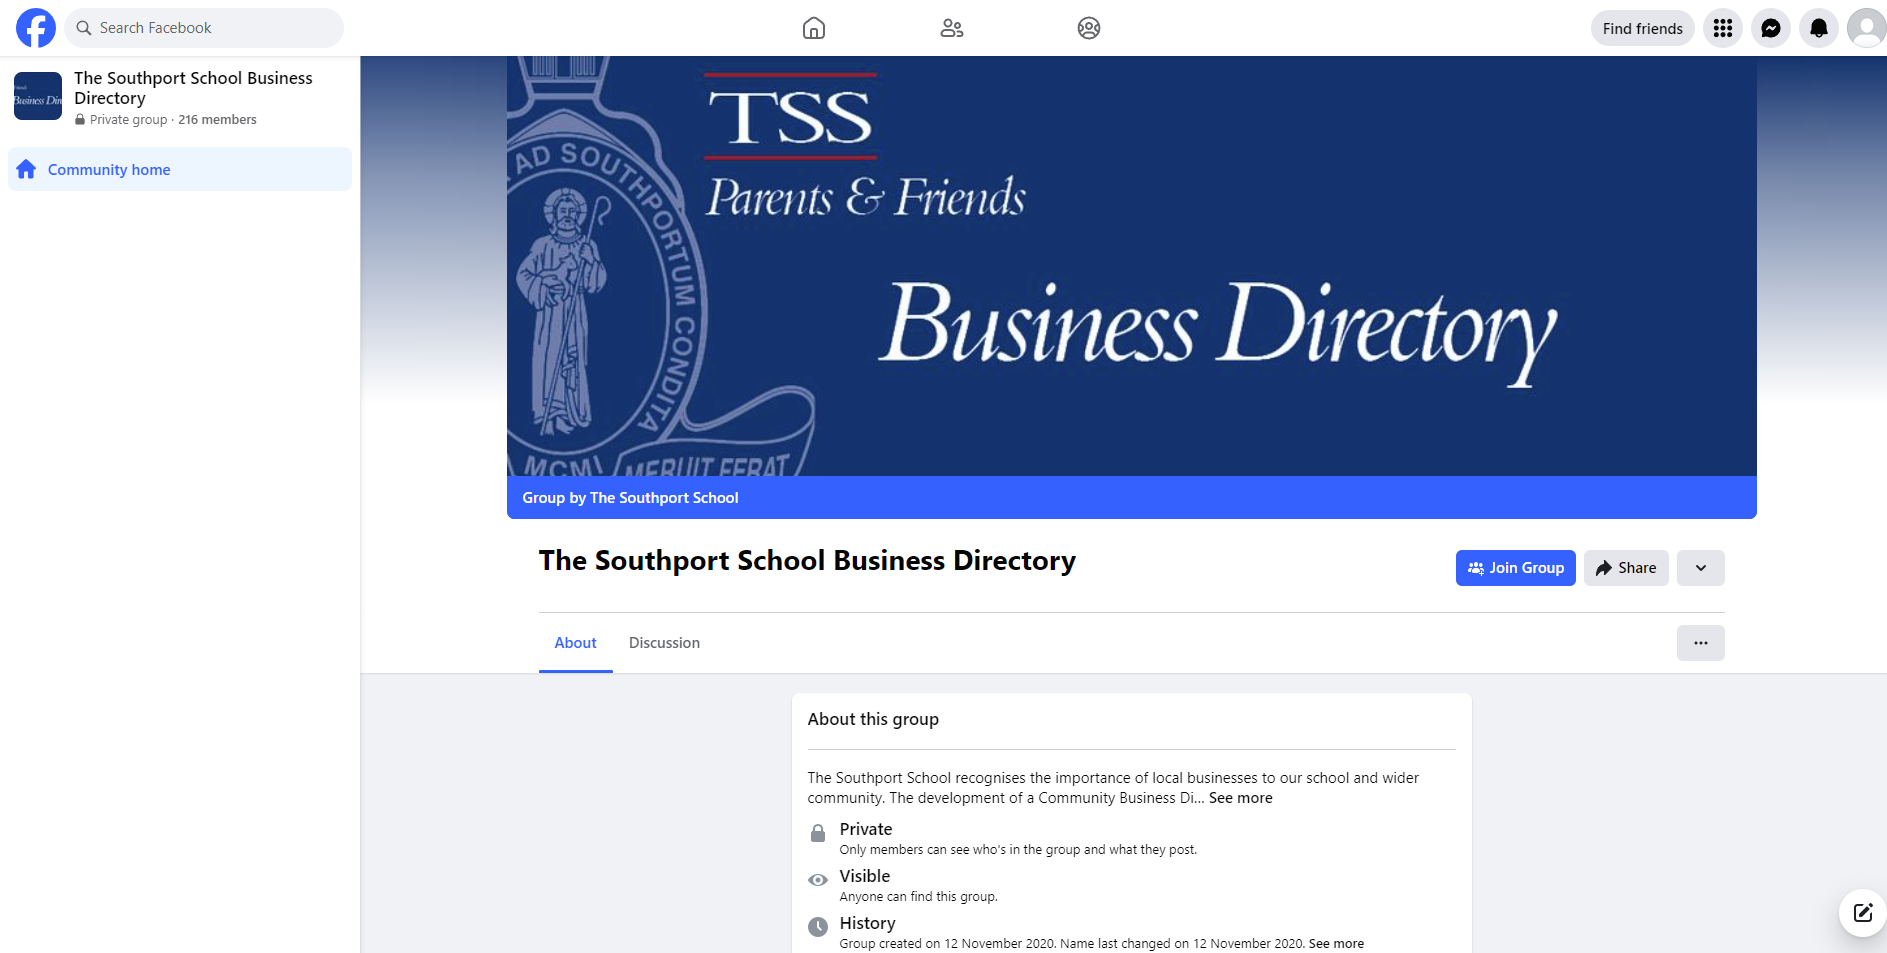 The Southport School Business Directory